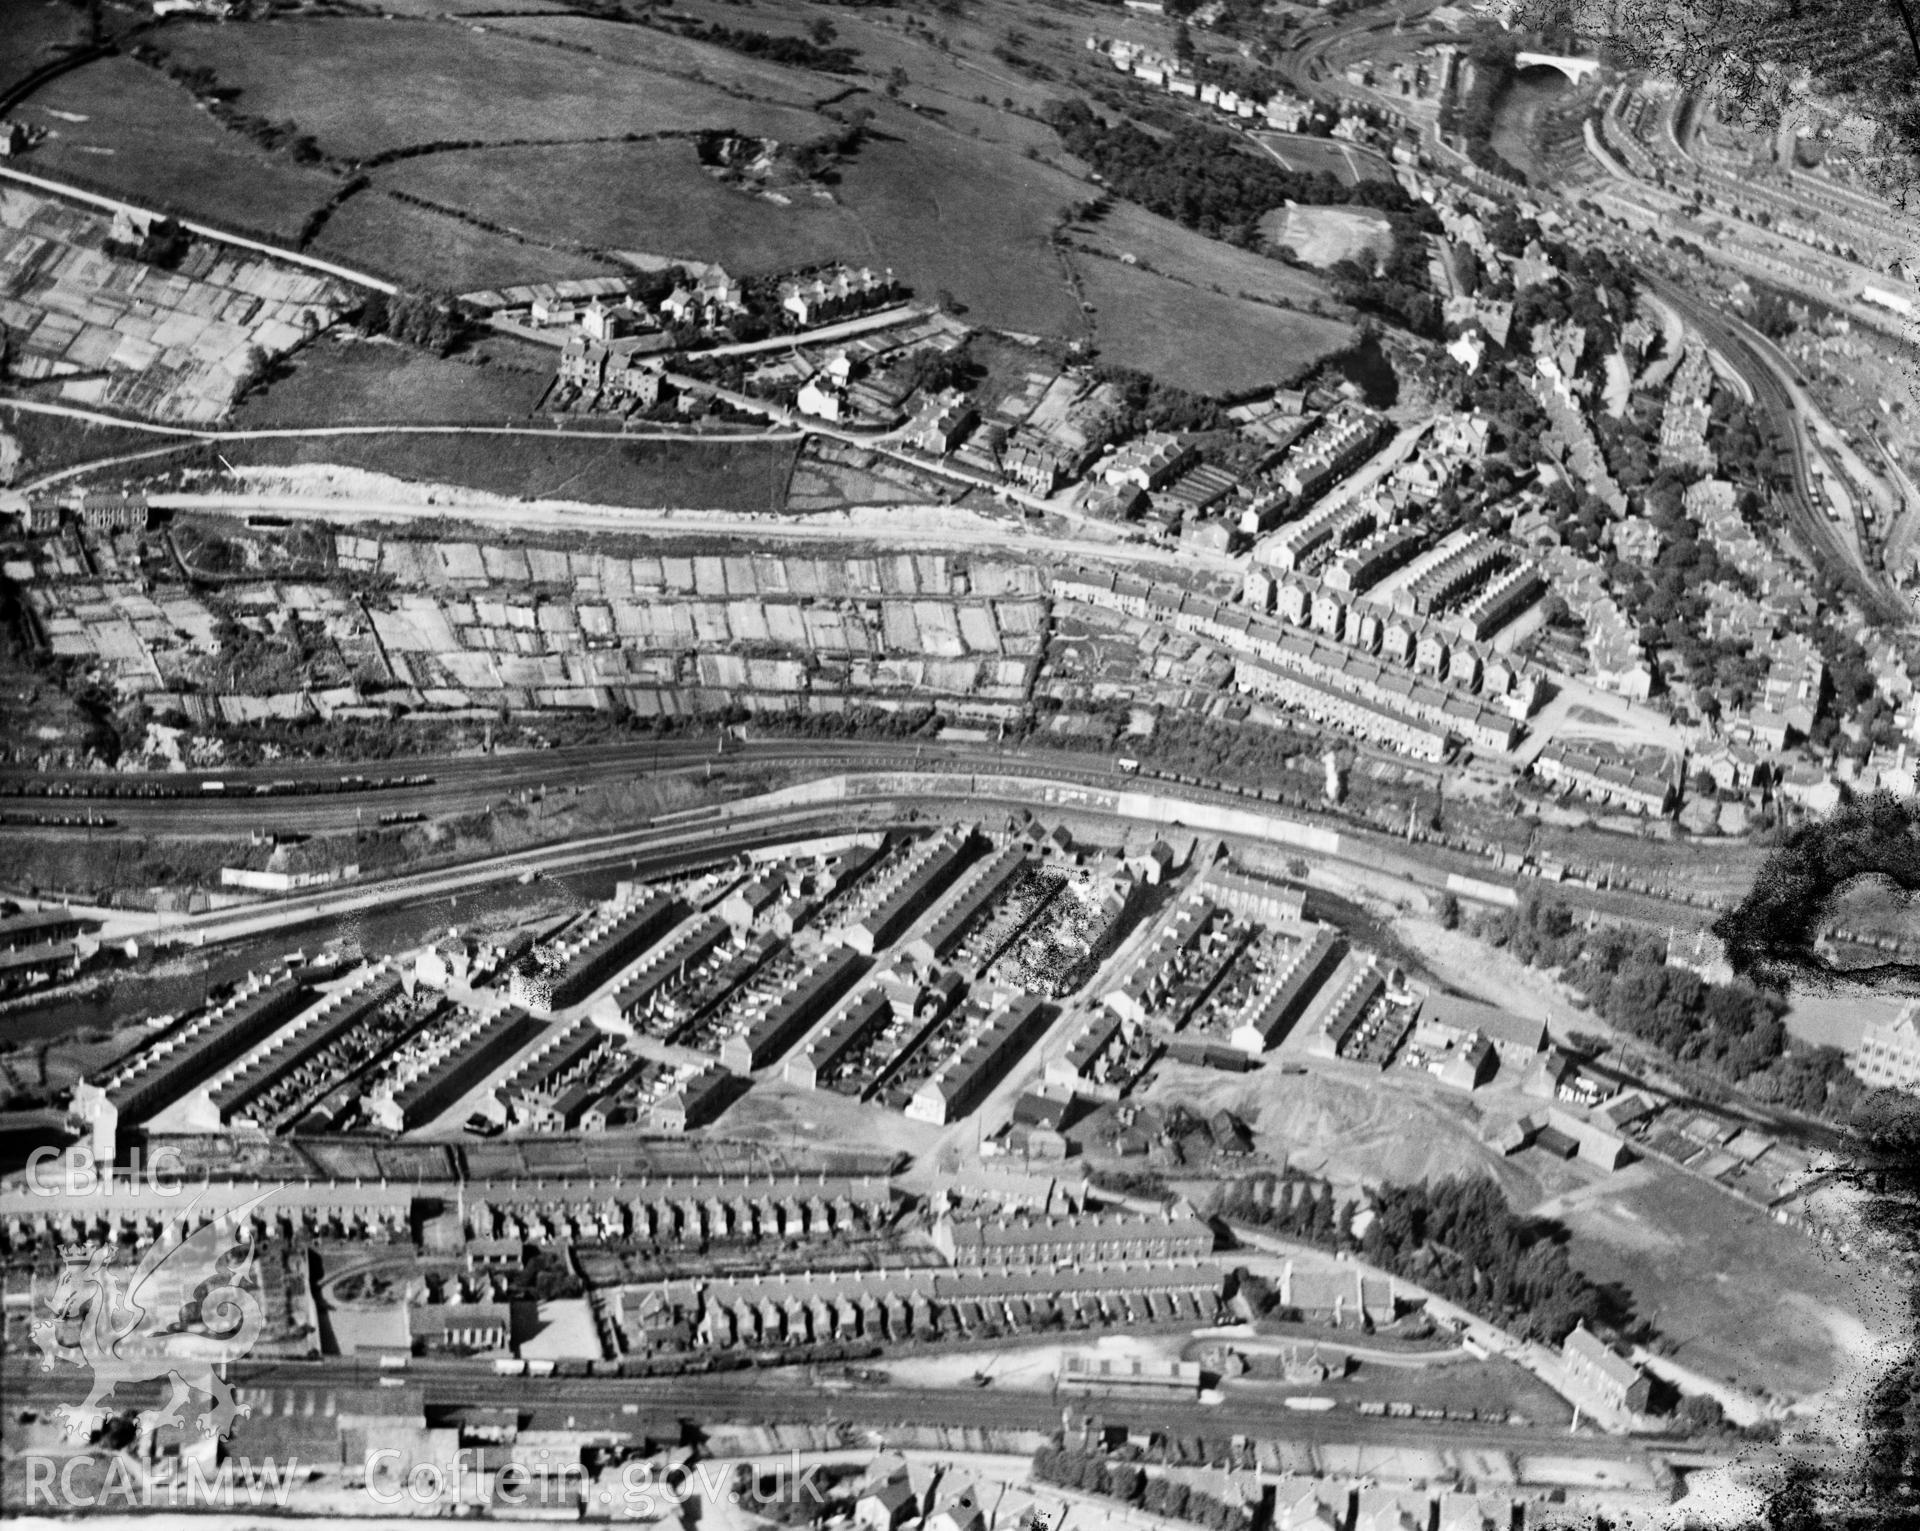 General view of Pontypridd, oblique aerial view. 5?x4? black and white glass plate negative.